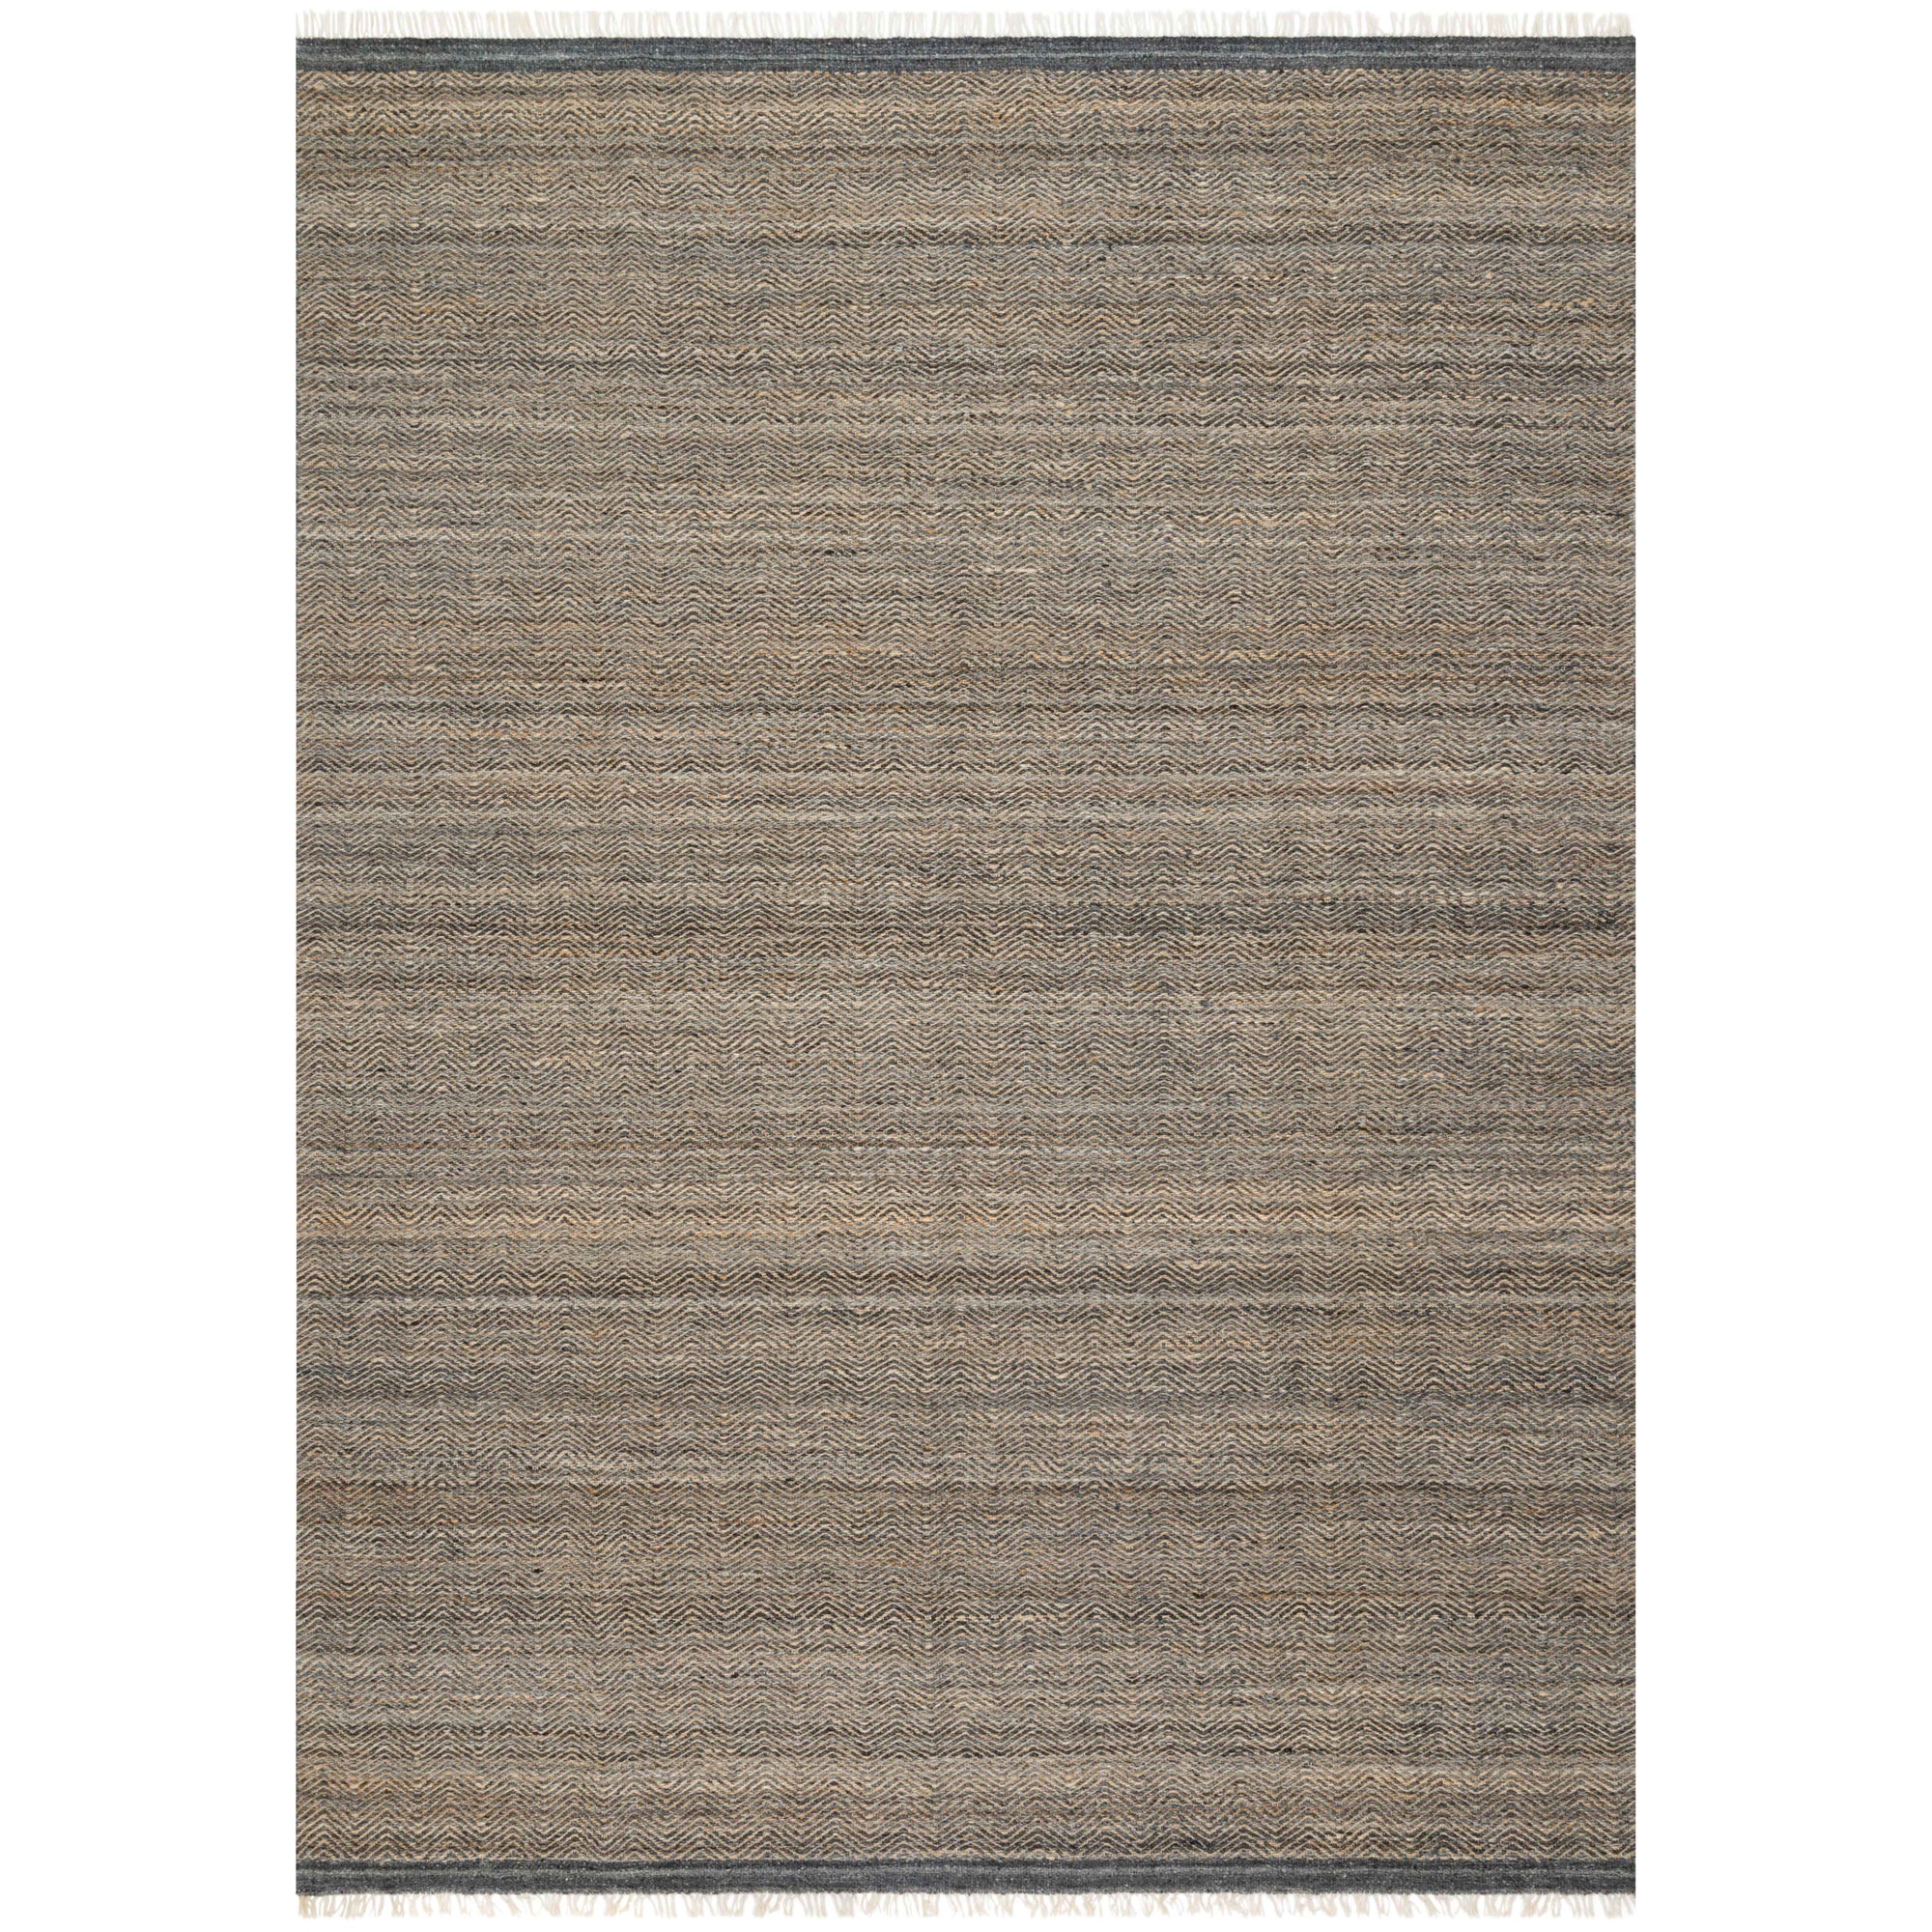 Rugs by Roo Loloi Omen Ink Area Rug in size 3' 6" x 5' 6"